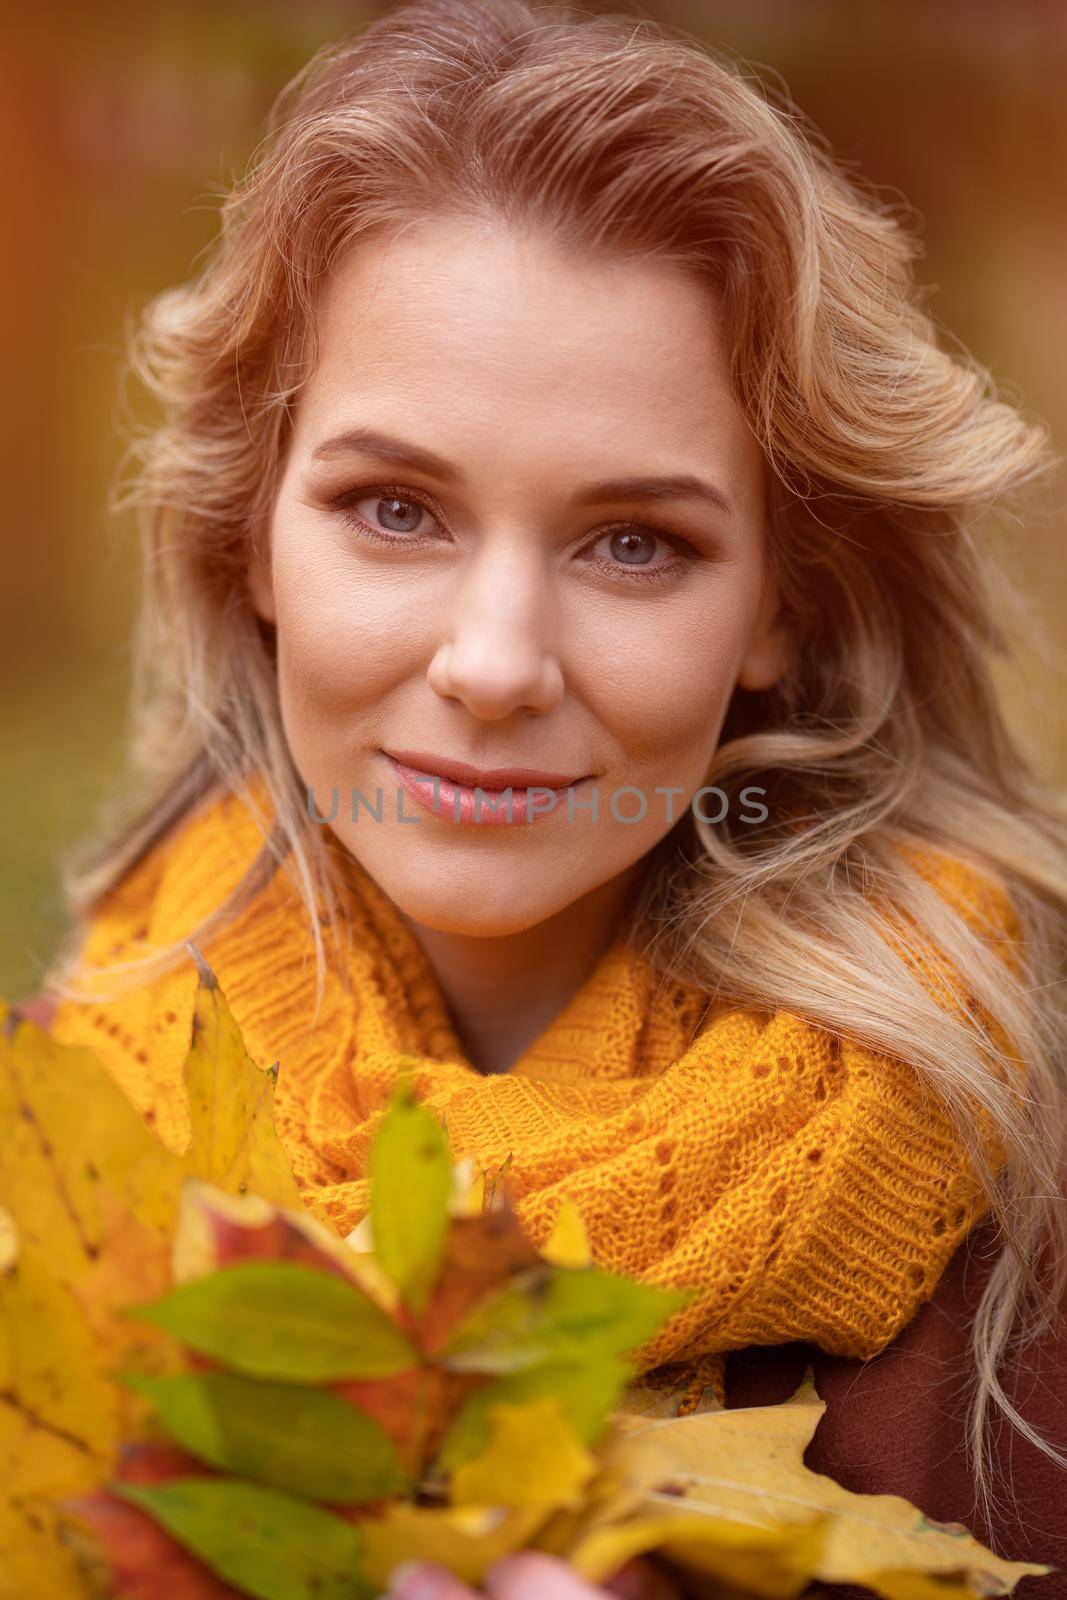 Young charming woman posing with fallen yellowed leaves for camera with walking around fall yellow garden or park. Beautiful smiling young woman in autumn leaves.